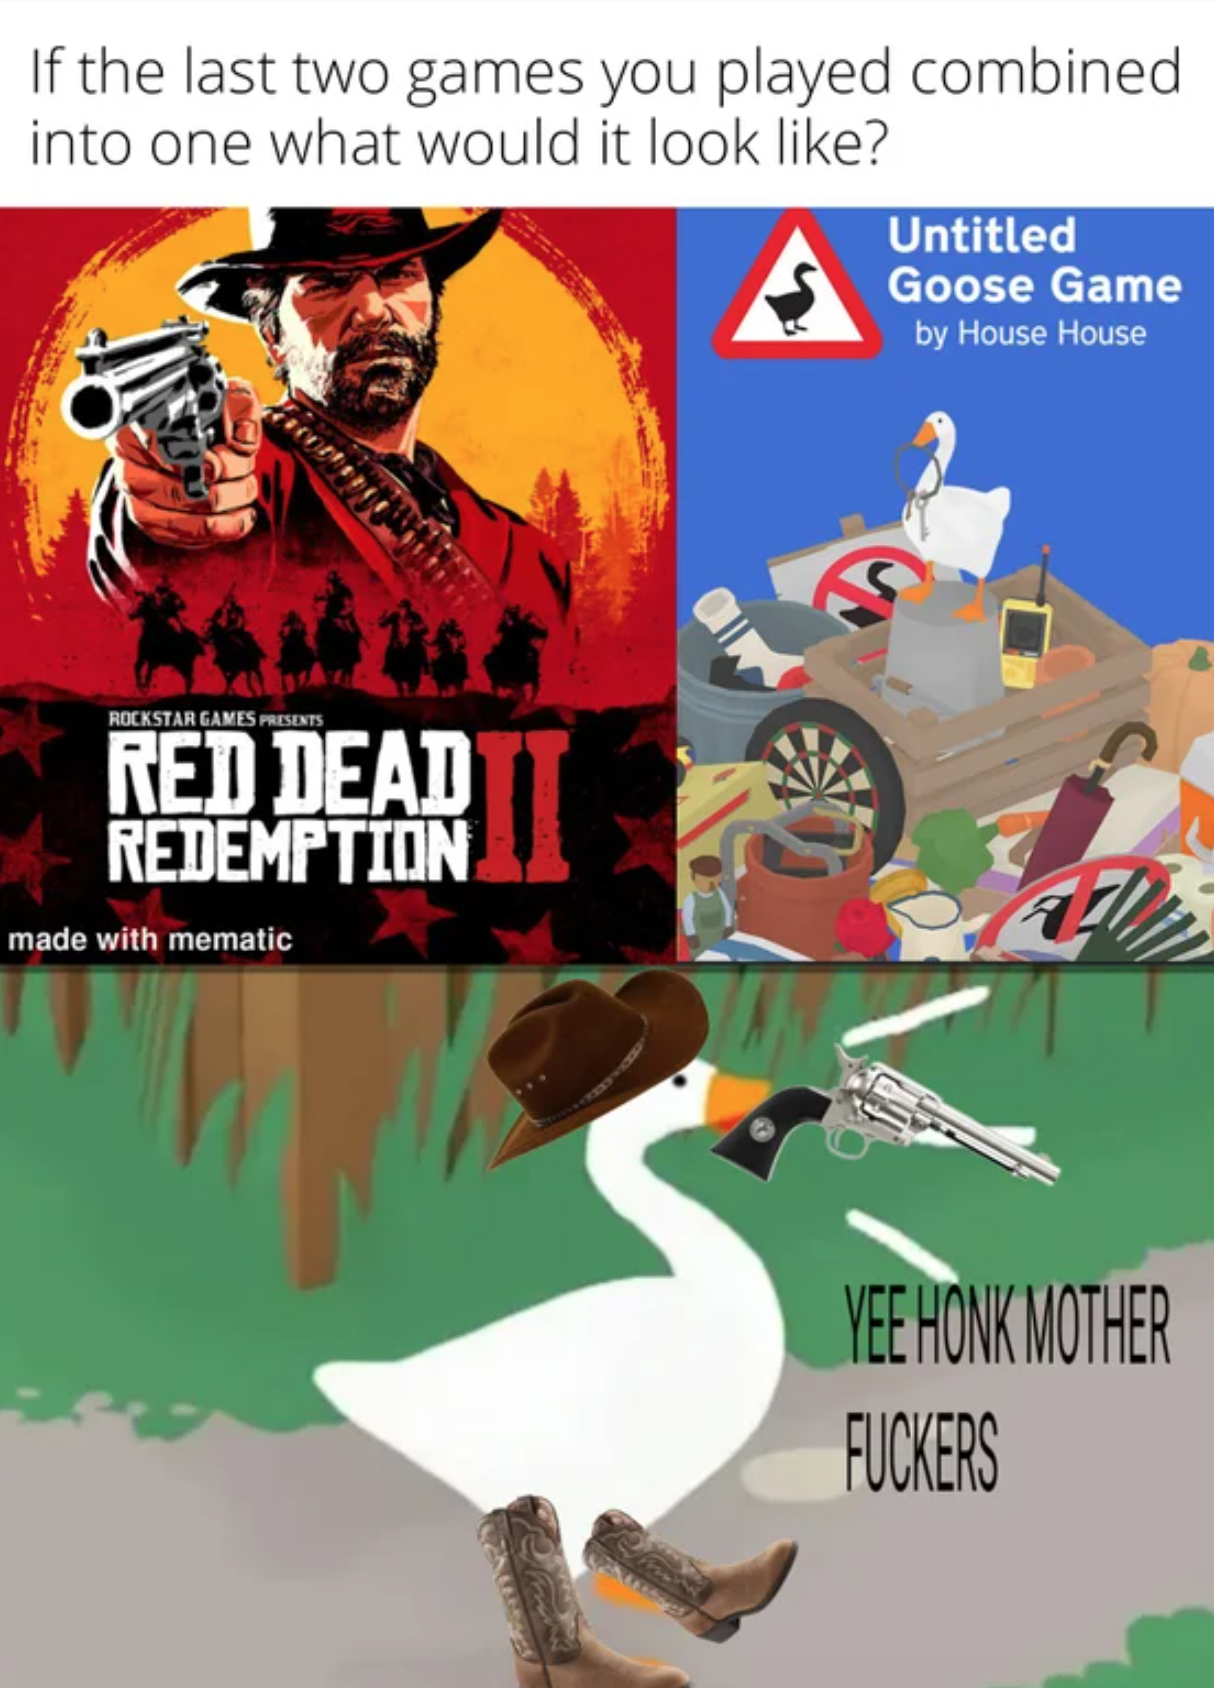 funny gaming memes - poster - If the last two games you played combined into one what would it look ? Untitled Goose Game by House House Antar Las Red Dead Redemption made with mematic Yee Honk Mother Fuckers